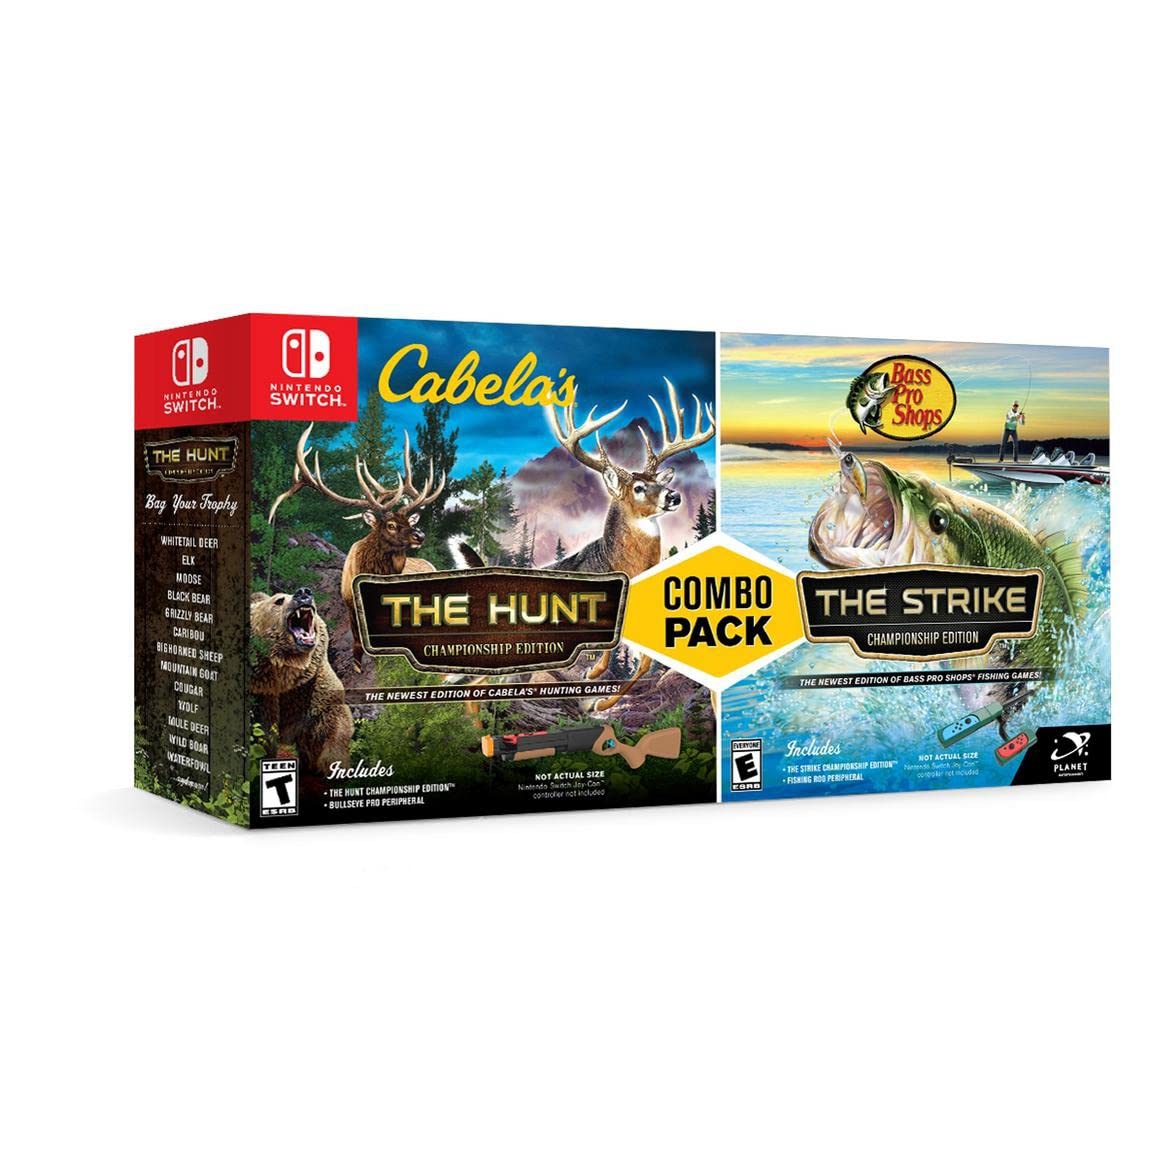  Bass Pro Shops: The Strike Championship Edition - Nintendo  Switch [video game] : Video Games